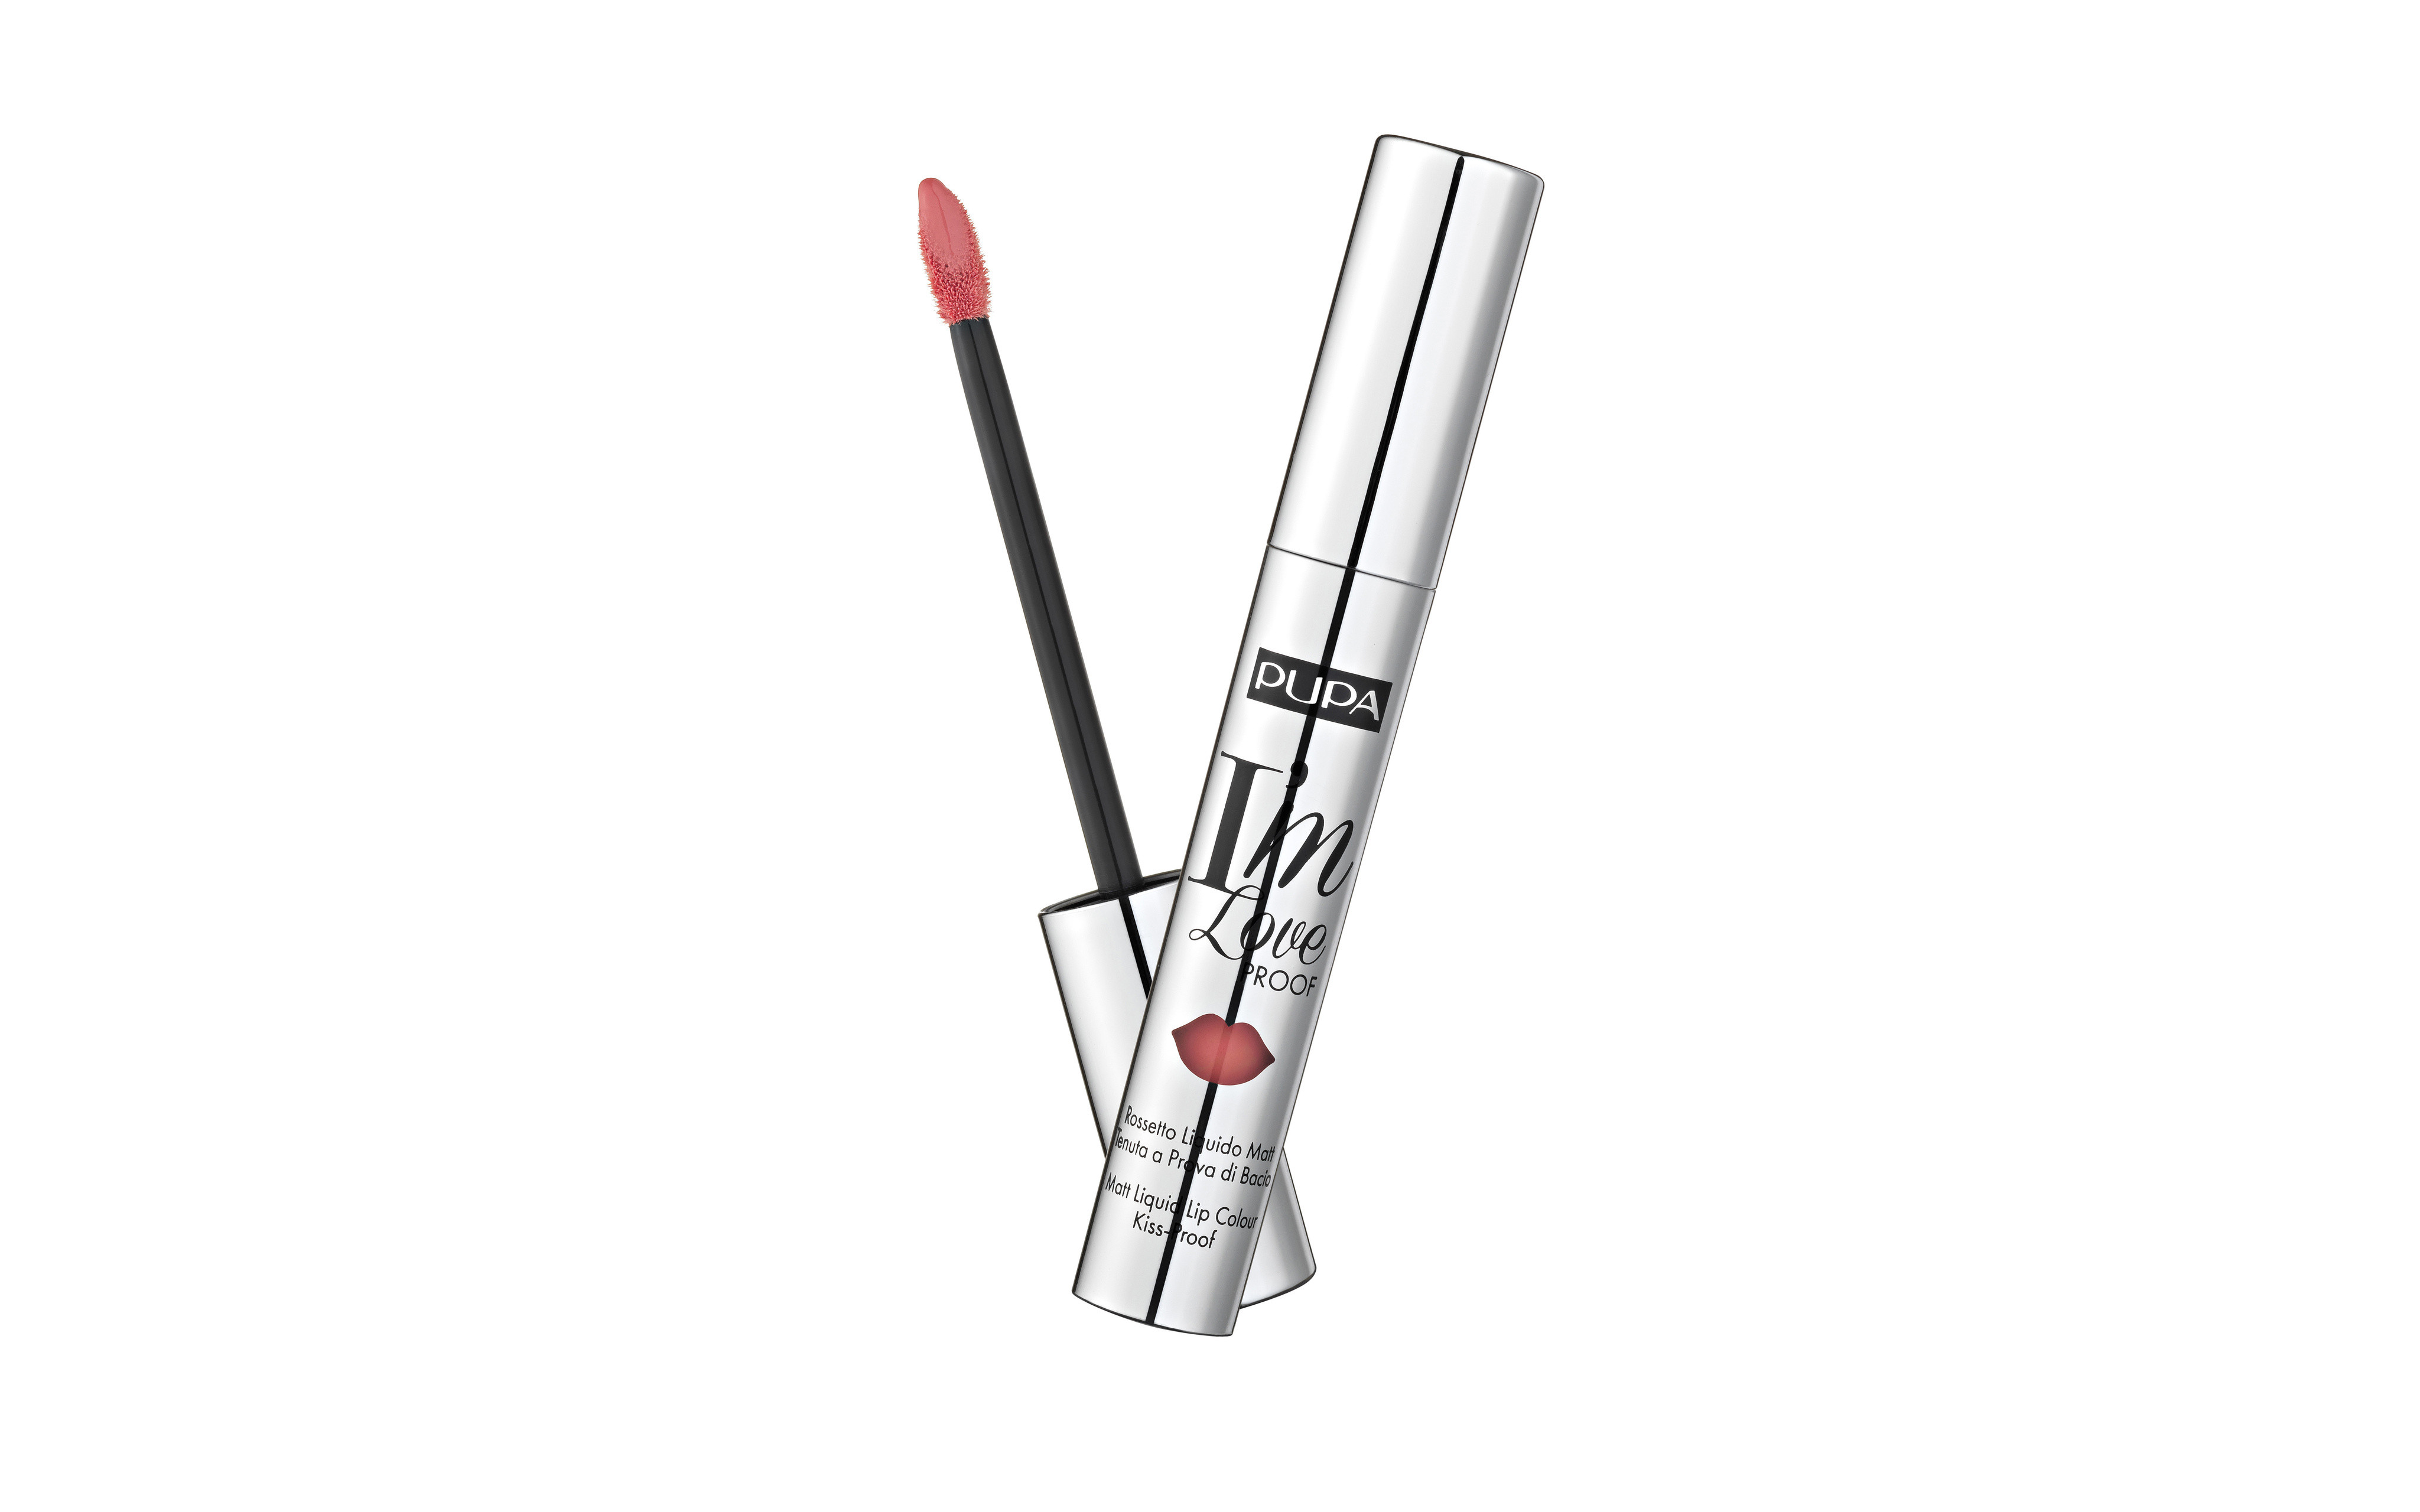 Pupa i'm loveproof rossetto liquido - 01, 001LIGHT ROSE, large image number 0